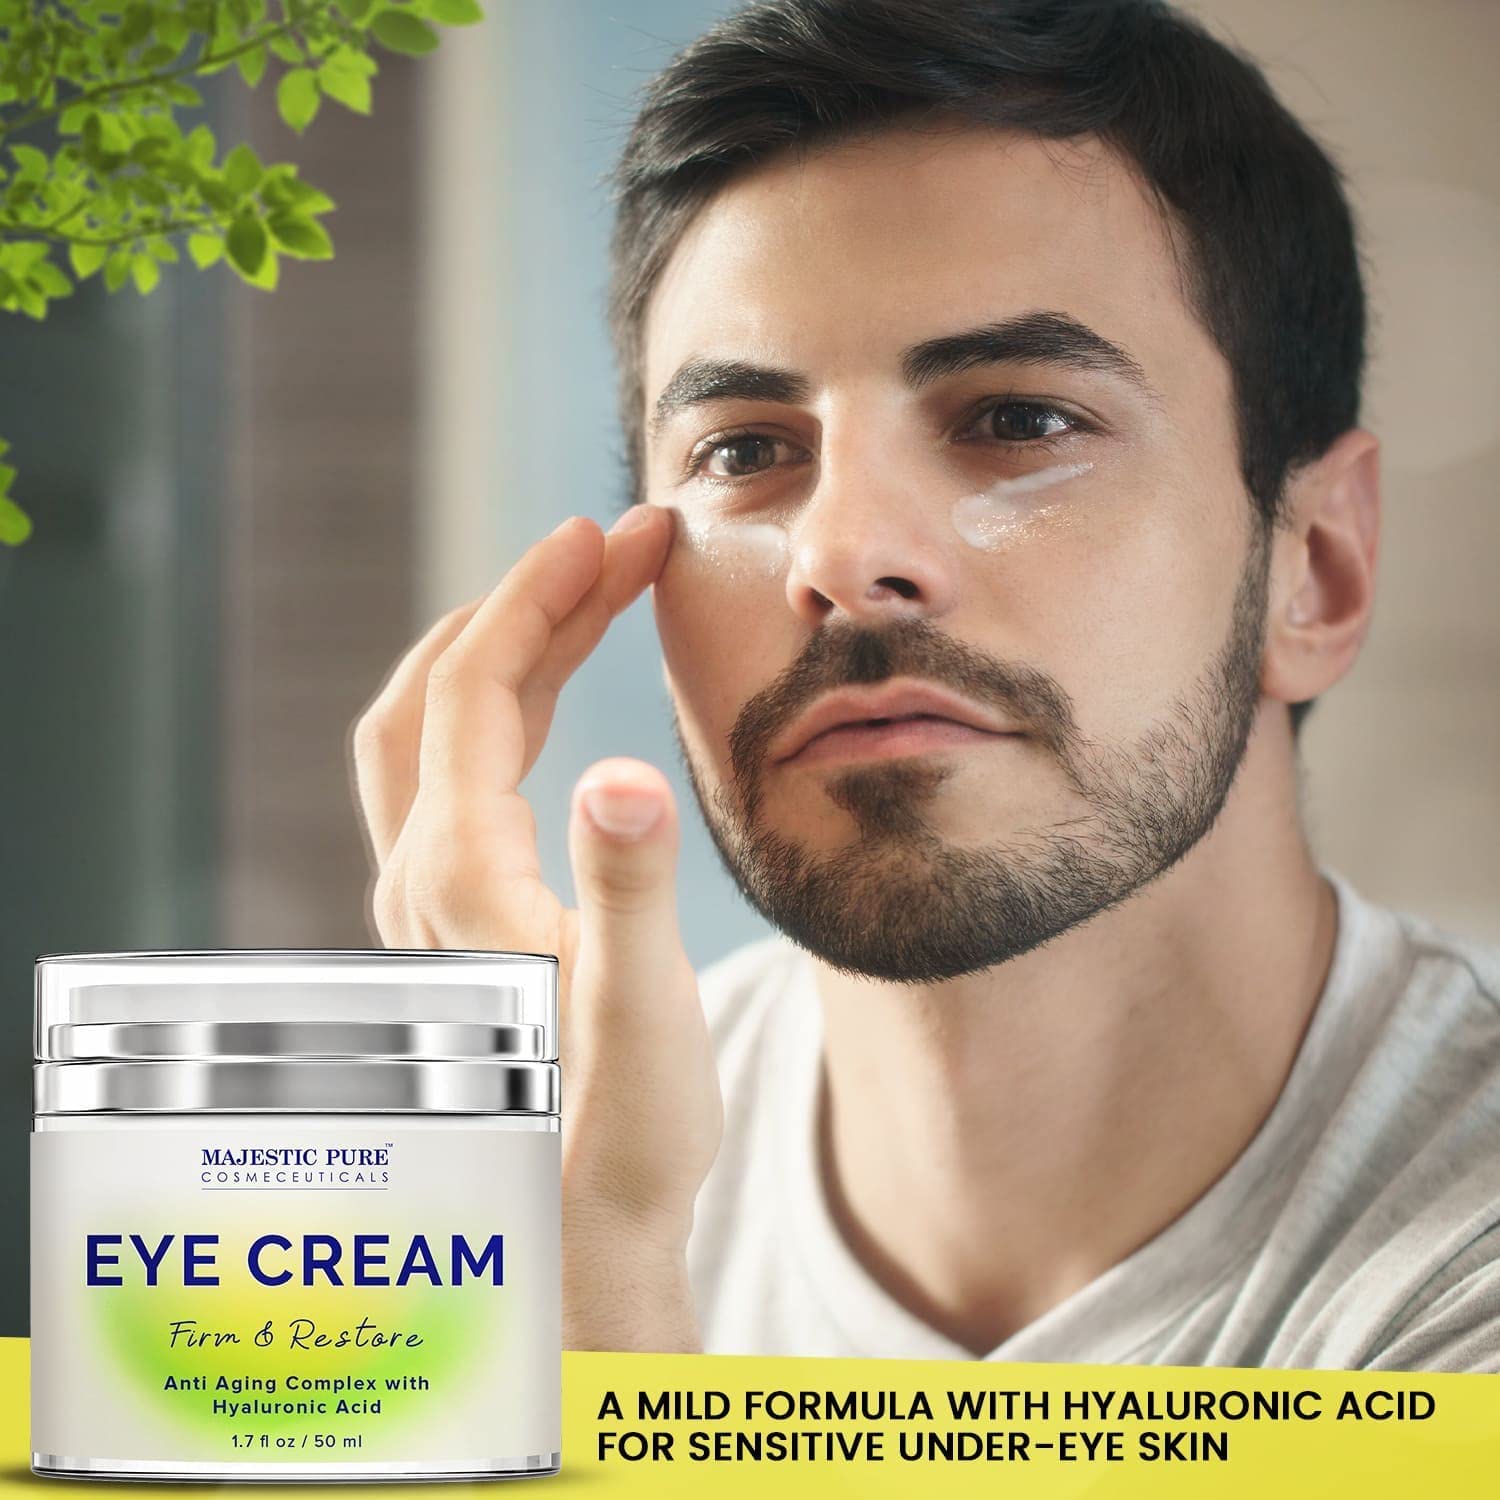 MAJESTIC PURE Under Eye Cream with Hyaluronic Acid - Anti Aging & Firming - Reduces Appearance of Dark Circles, Puffiness, Eye Bags & Crow’s Feet - Youthful & Bright Appearance - Men and Women - 50ml : Beauty & Personal Care